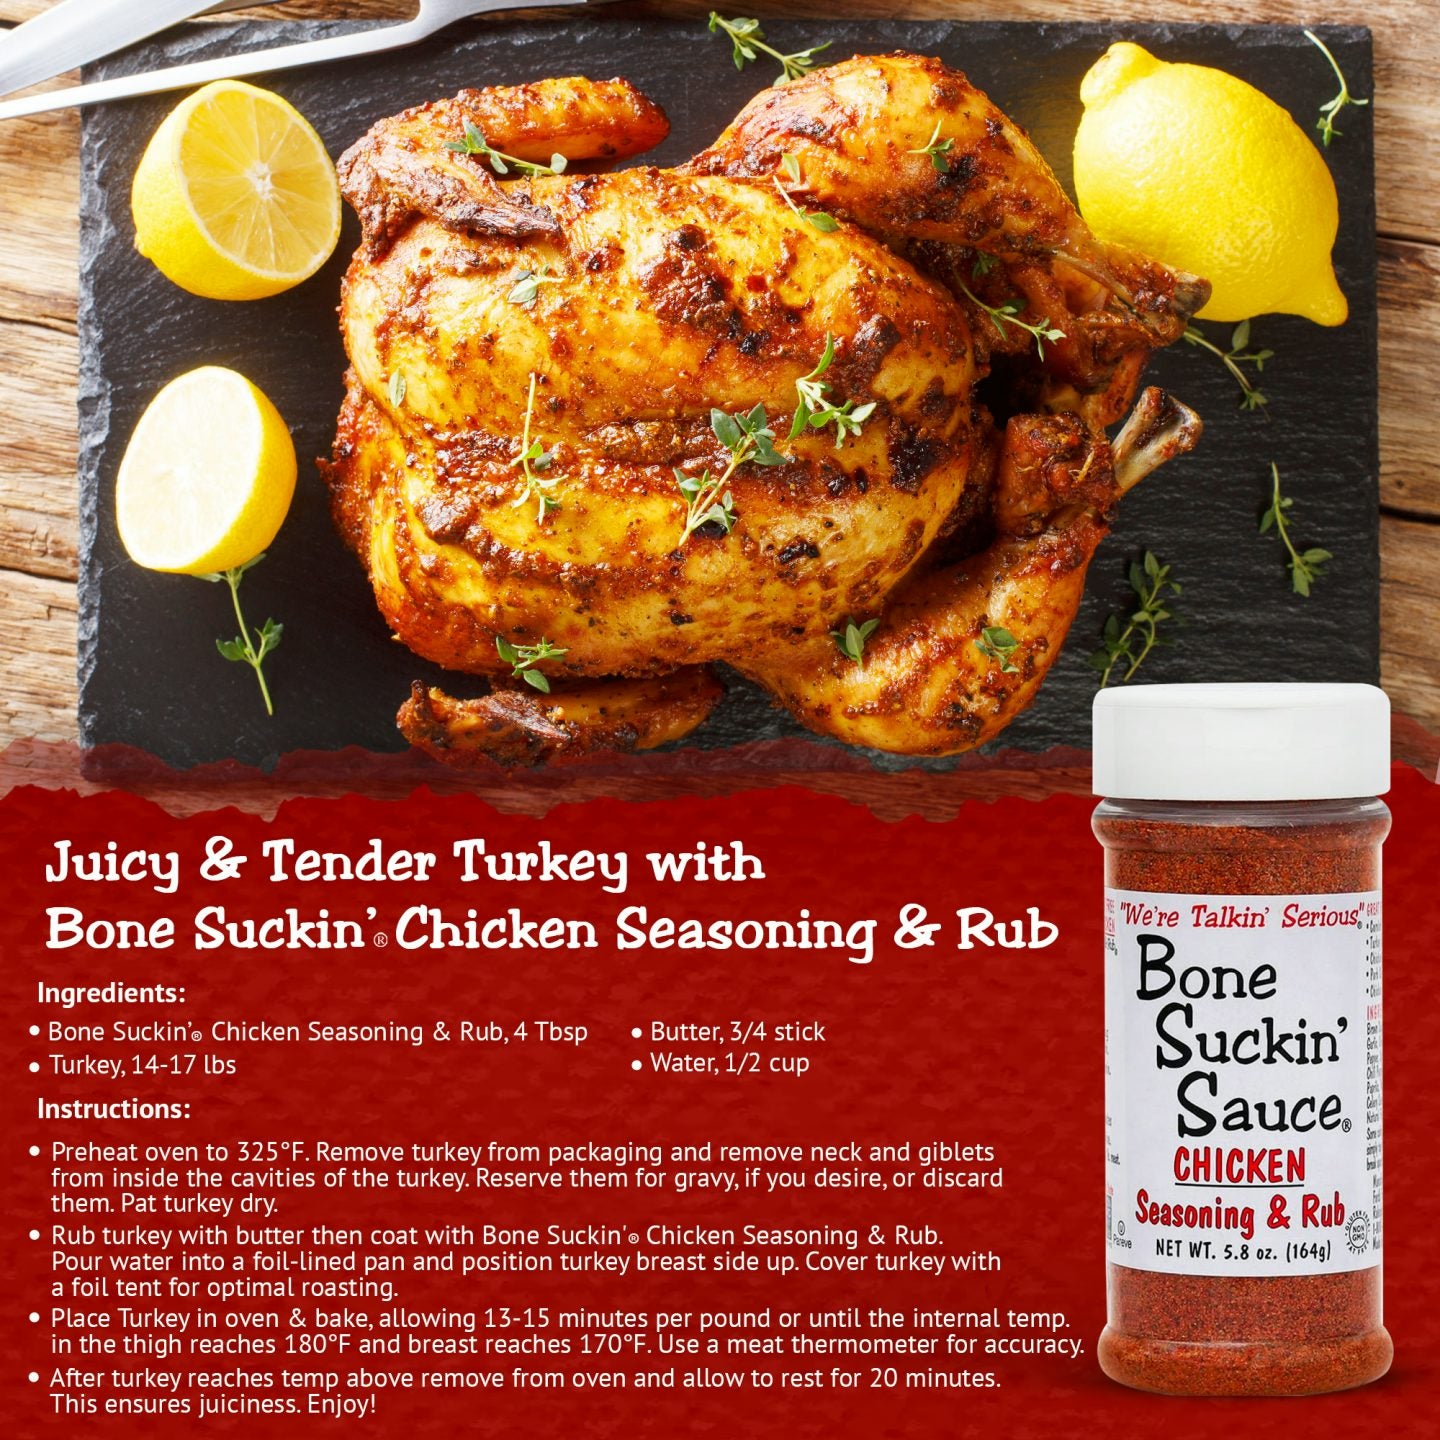 Juicy & Tender Turkey with Bone Suckin Seasoning & Rub. Recipe.  Ingredients: Bone Suckin' Chicken Seasoning & Rub, 4 Tbsp, Turkey, 14-17 lbs, Butter, 3/4 stick, Water, 1/2 cup. Instructions: Preheat oven to 325°F. Remove neck and giblets and pat turkey dry. Rub turkey with butter then coat with seasoning. Pour water into foil-lined pan and place turkey breast side up. Cover turkey with foil tent. Bake, allowing 13-15 minutes per pound. After turkey is done. Allow to rest for 20 minutes. 